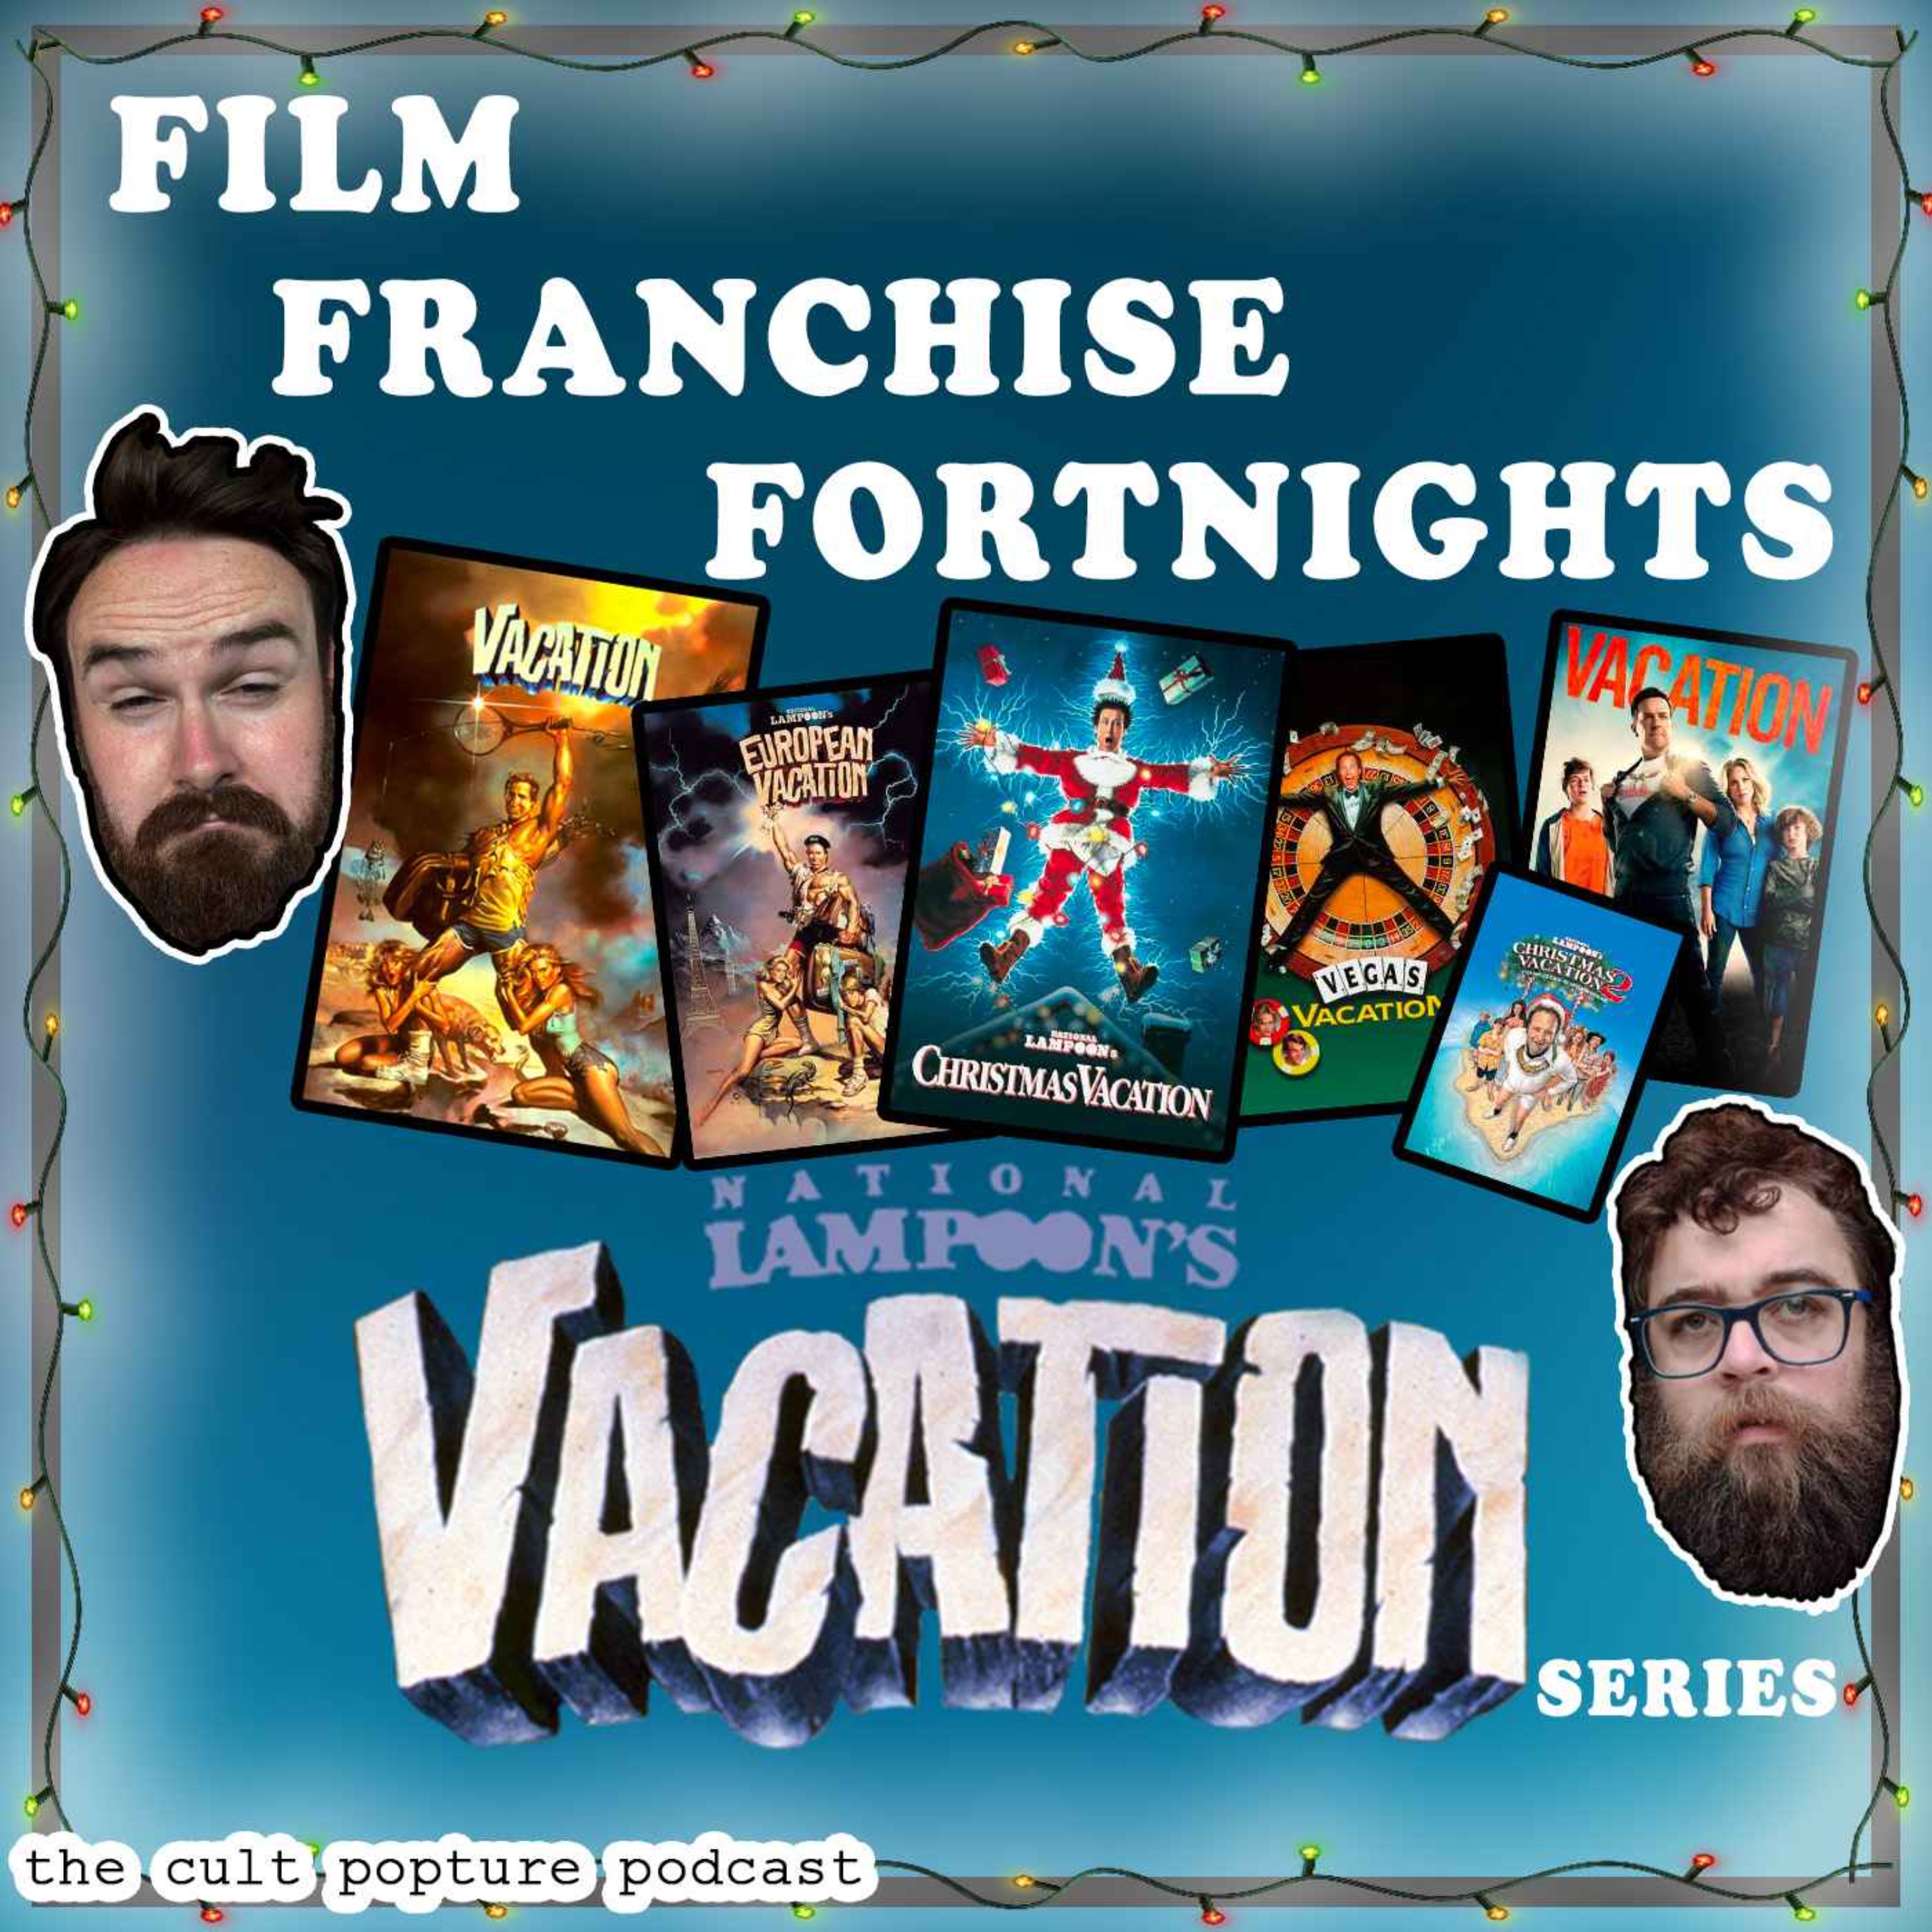 National Lampoon's "Vacation" Series | Film Franchise Fortnights